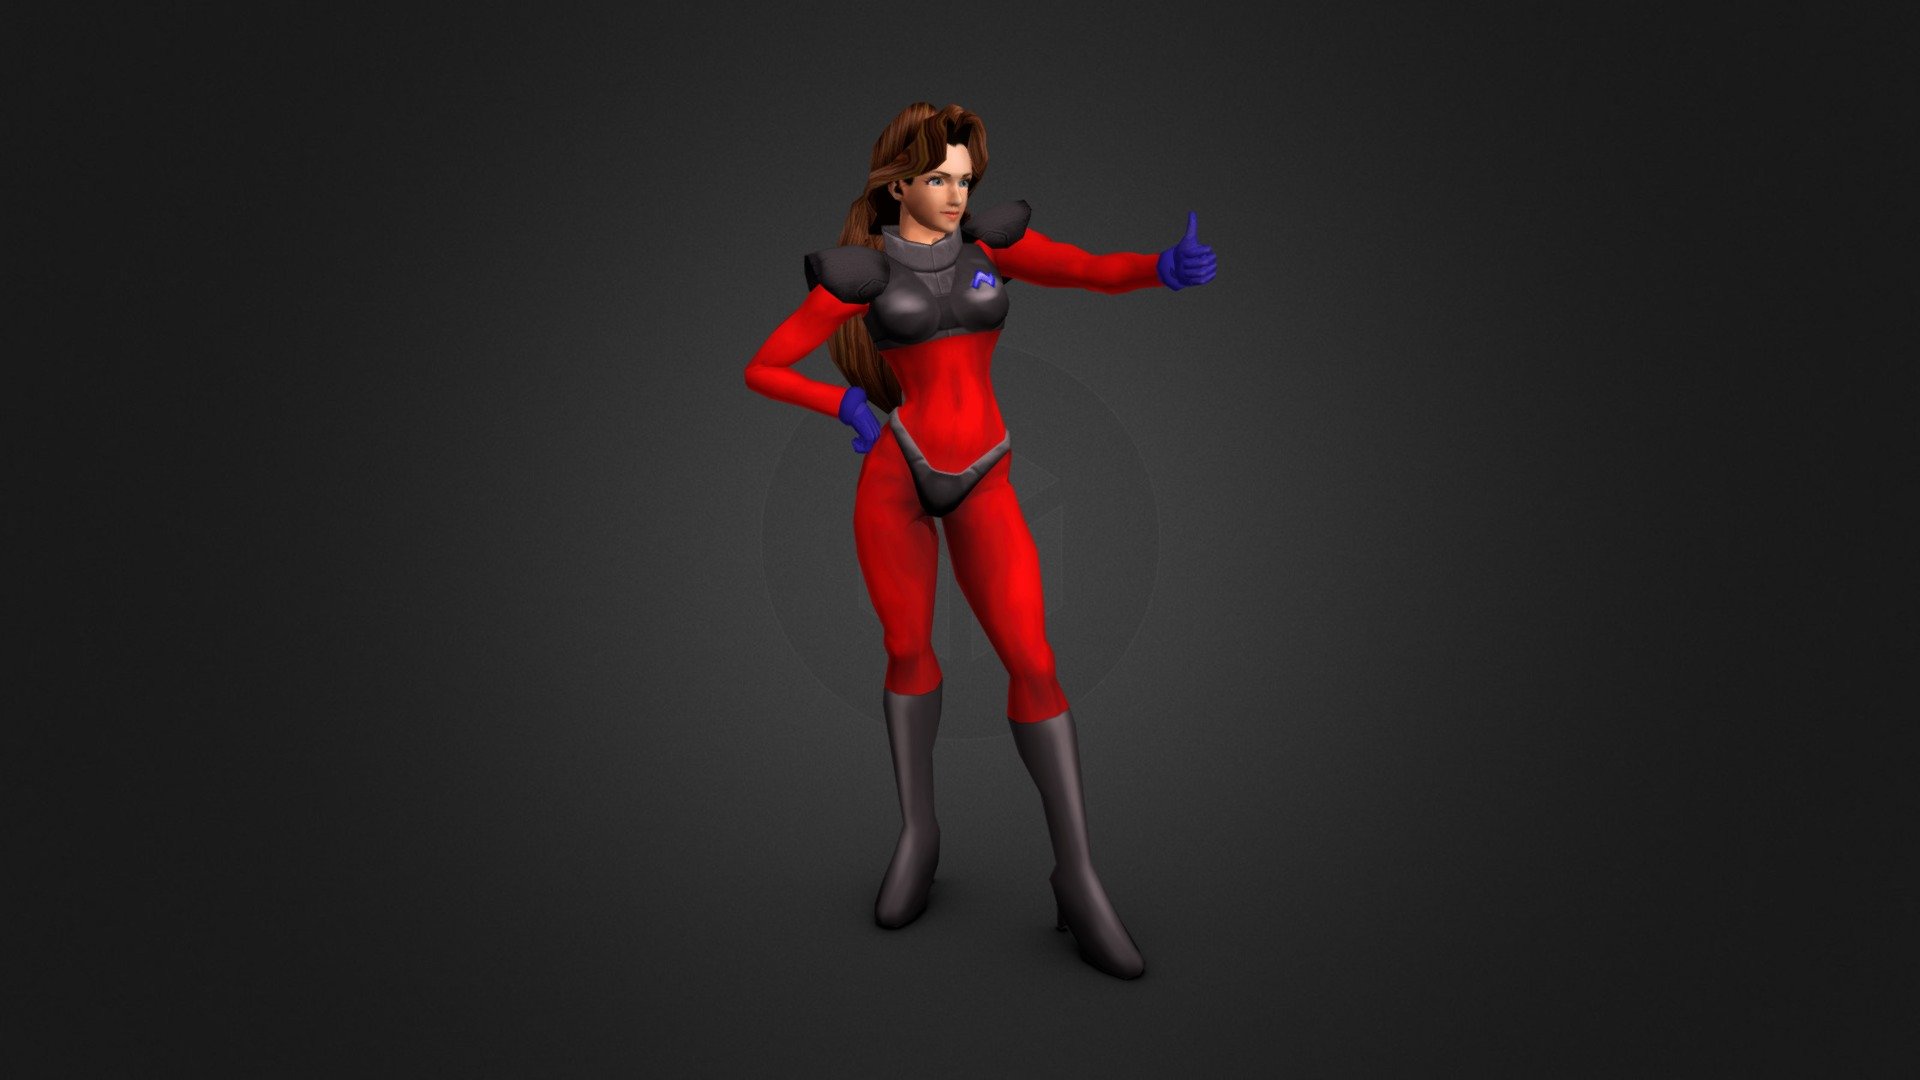 A palette-swapped, F-Zero GX-based 3D model of the Jody Summer trophy (from Super Smash Bros Brawl) to match the colors of my 2001 Volvo S60 (named after Jody Summer):




Red unitard to match Classic Red exterior color,

Charcoal-gray armor to match exterior moldings and interior color,

Black shoulder pads to match facelifted mirrors,

Smoke-gray boots to match gunmetal-gray-painted wheels

Blue gloves remained untouched to match brake caliper color,

Blue badge thingy, which is—coincidentally—near her heart to match the color of the engine covers.

This was an absolute cake walk to finish, and I had too much fun with it! Learned quite a bit about 3D model extensions from this, as well.



Original 3D model submitted by Link101 on Models Resource - Jody Summer F-Zero GX - Volvo S60 Edition - 3D model by NeoFalcon07 3d model